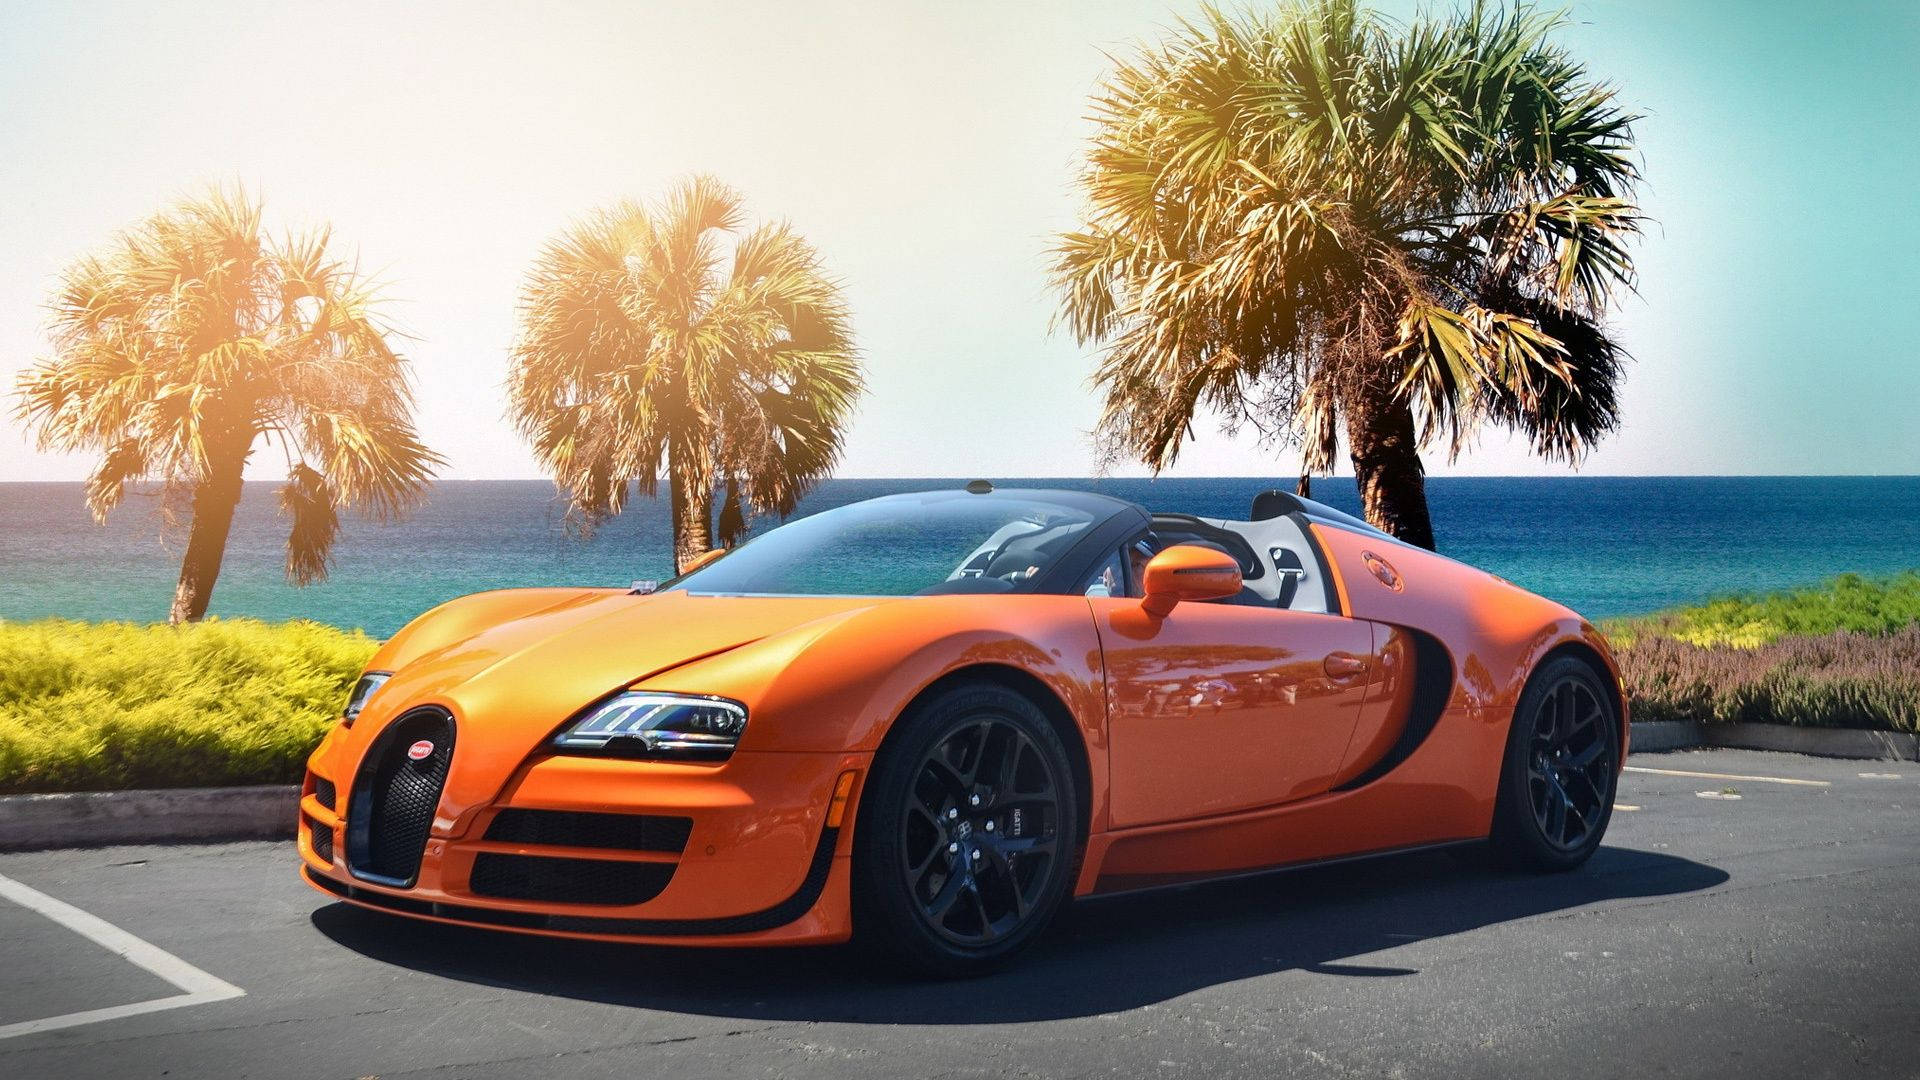 Cool Bugatti With Palm Trees Background